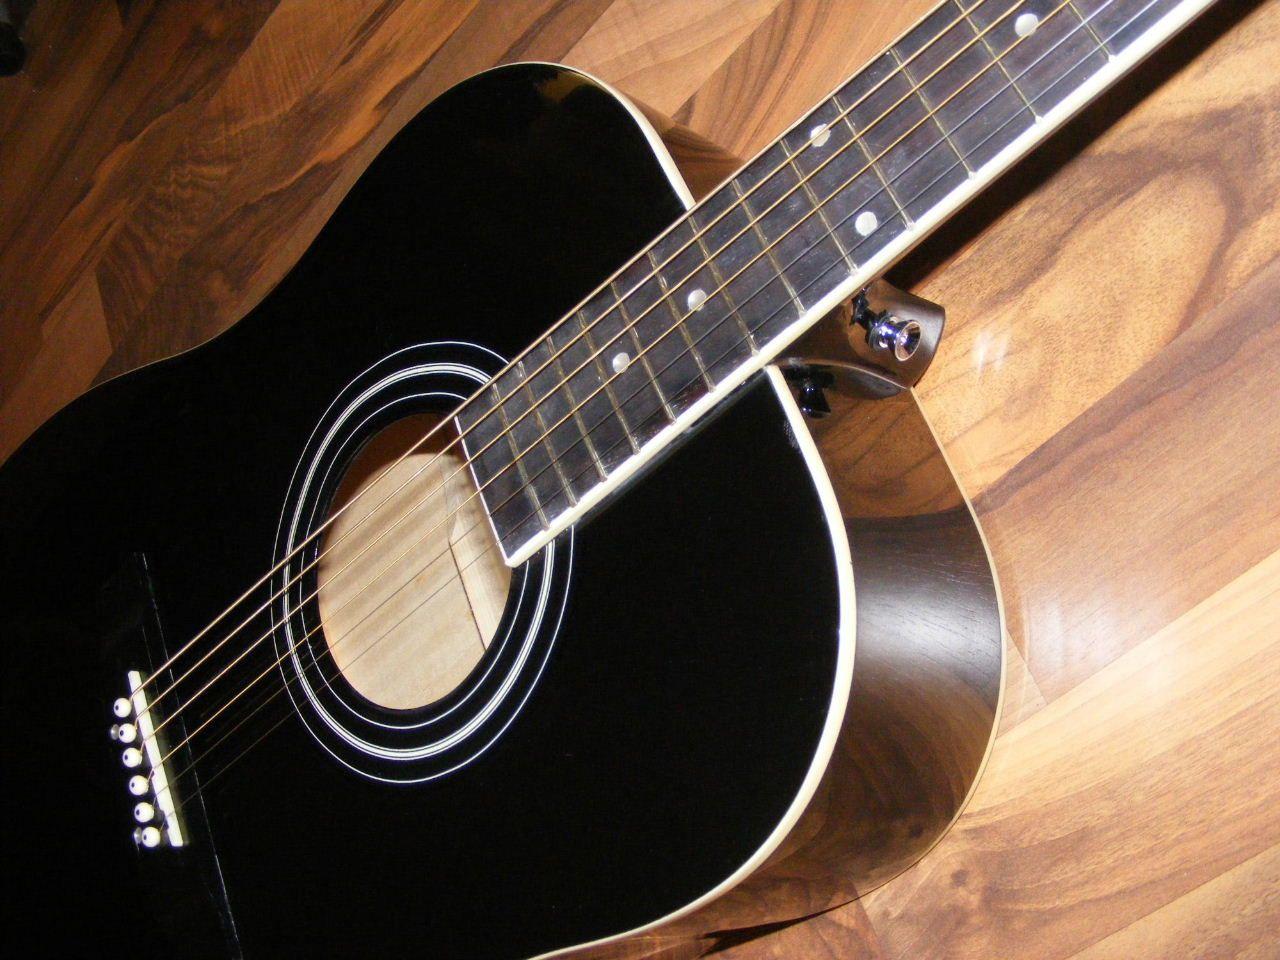 Blue And Black Acoustic Guitar 11 Background Wallpaper